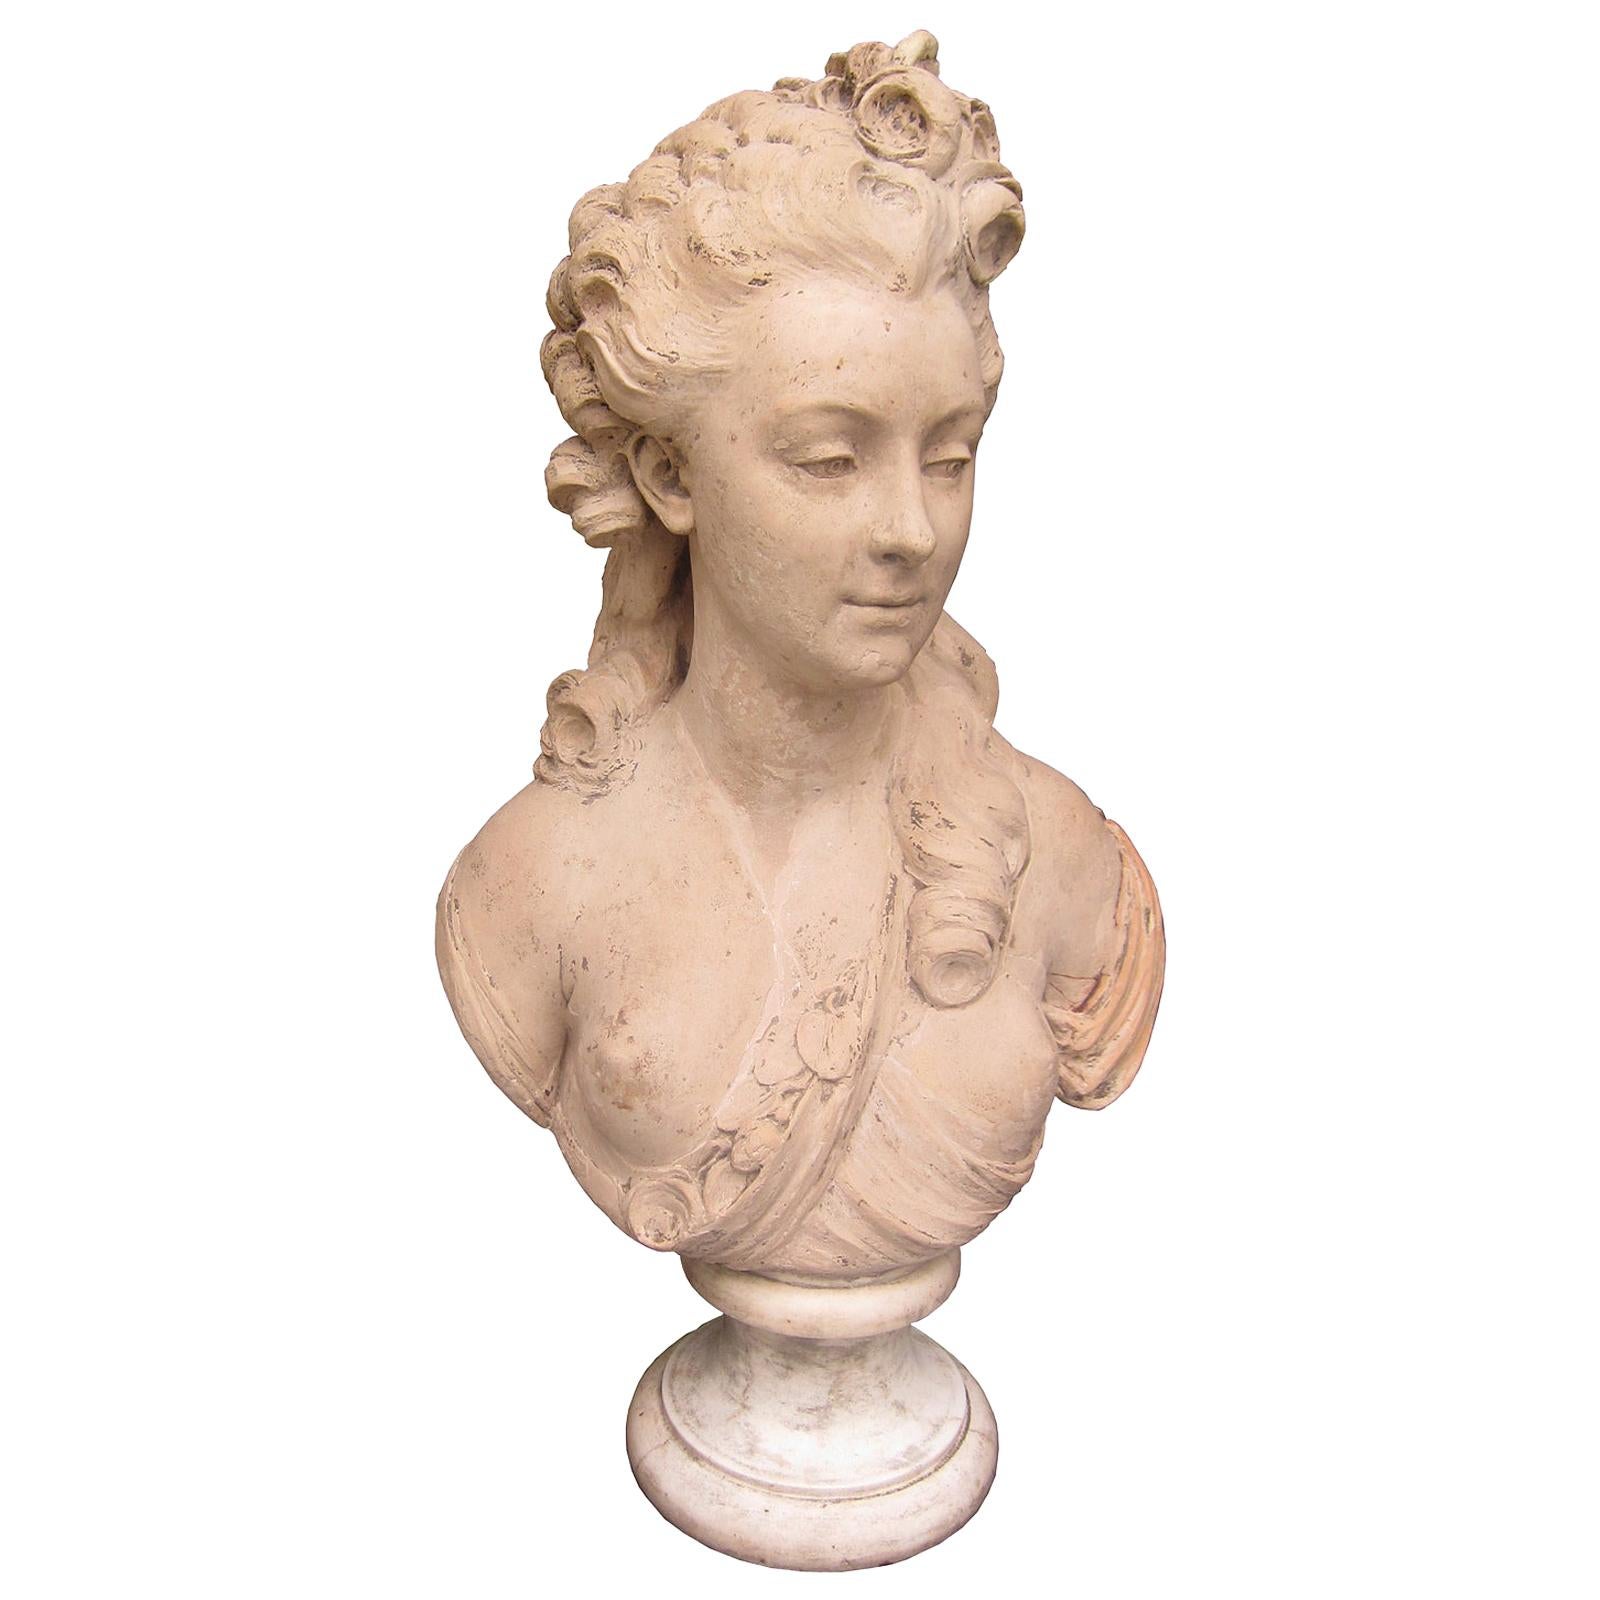 18th-19th Century Terracotta Bust of Madame Dubarrys